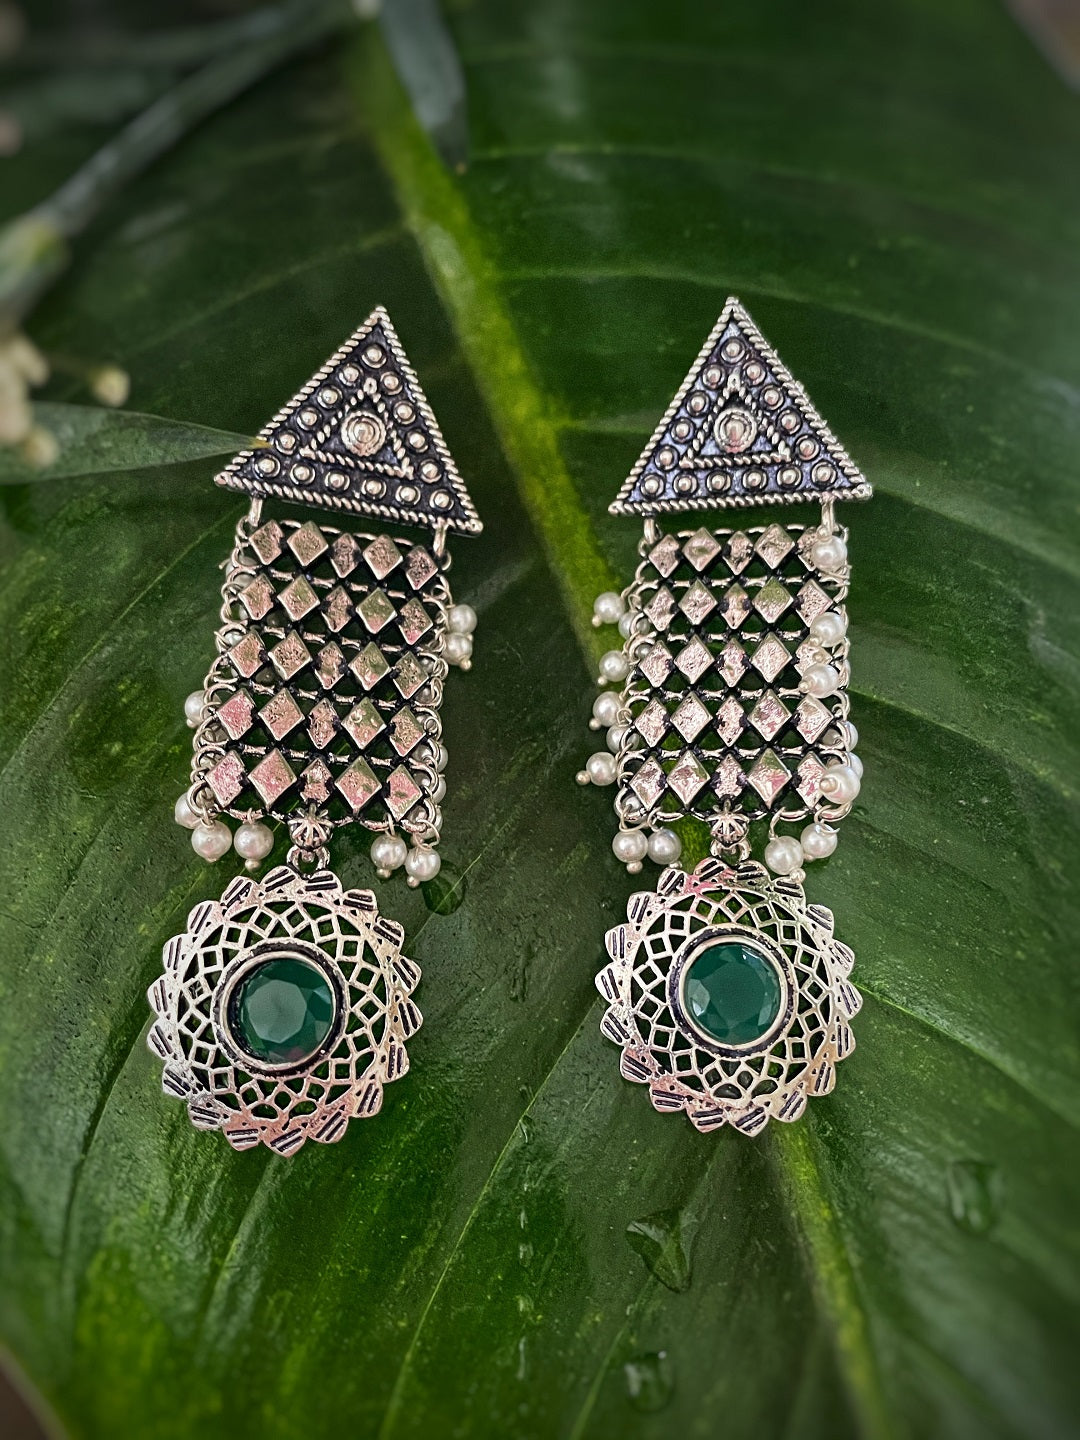 Oxidized Silver Earrings with Mirror Work and Coins – Bollywood Wardrobe